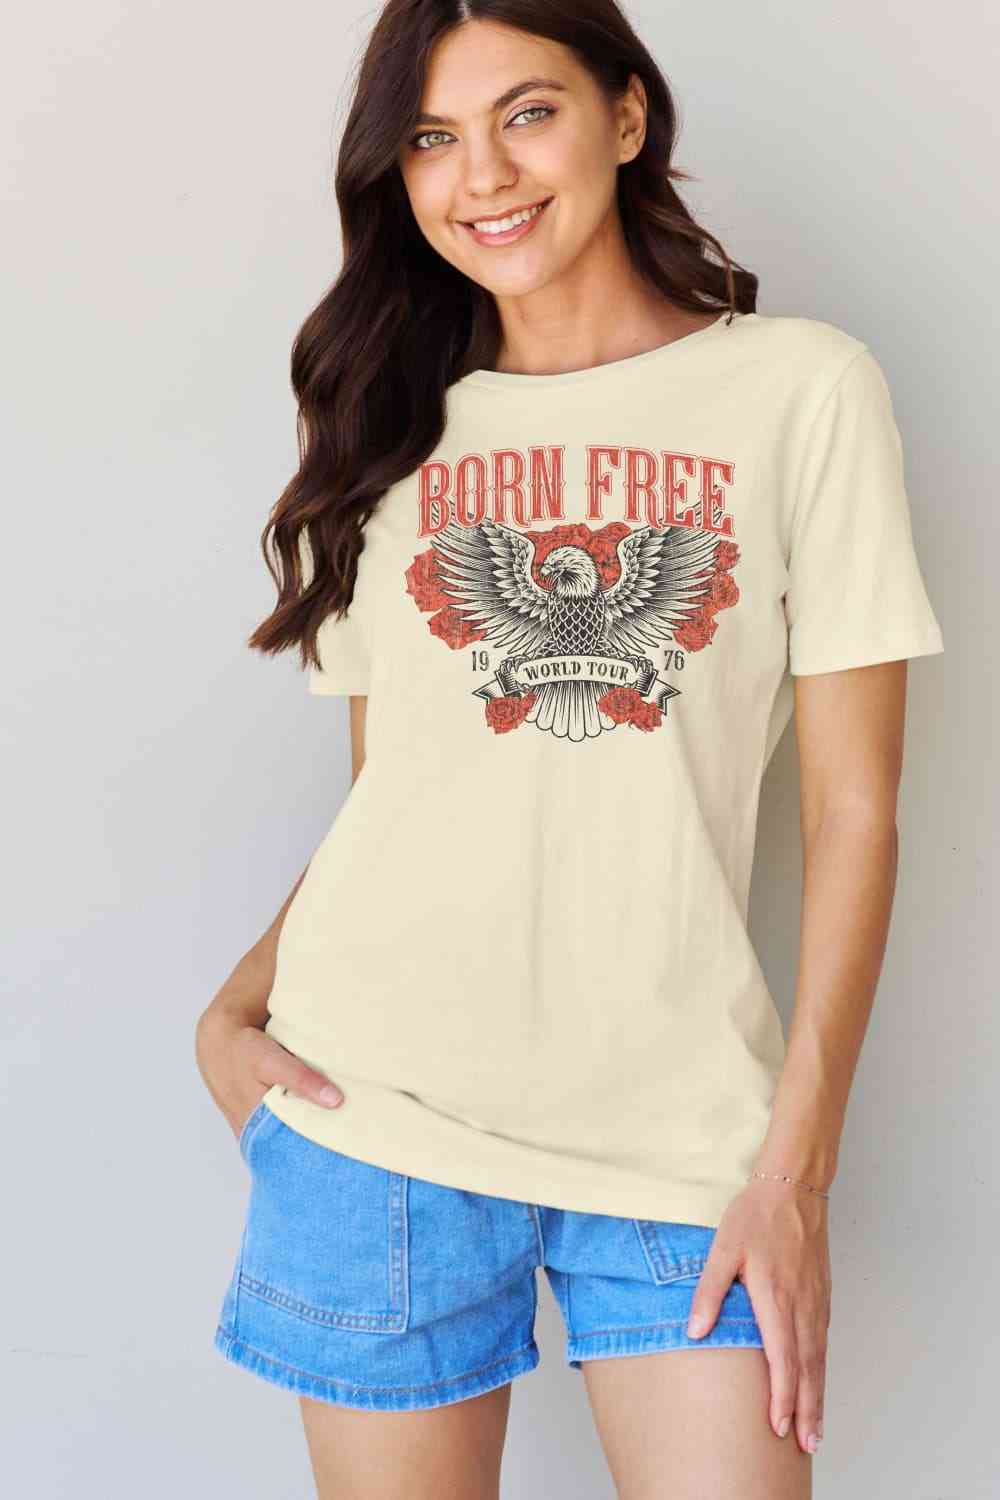 Simply Love Full Size BORN FREE 1976 WORLD TOUR Graphic Cotton T-Shirt